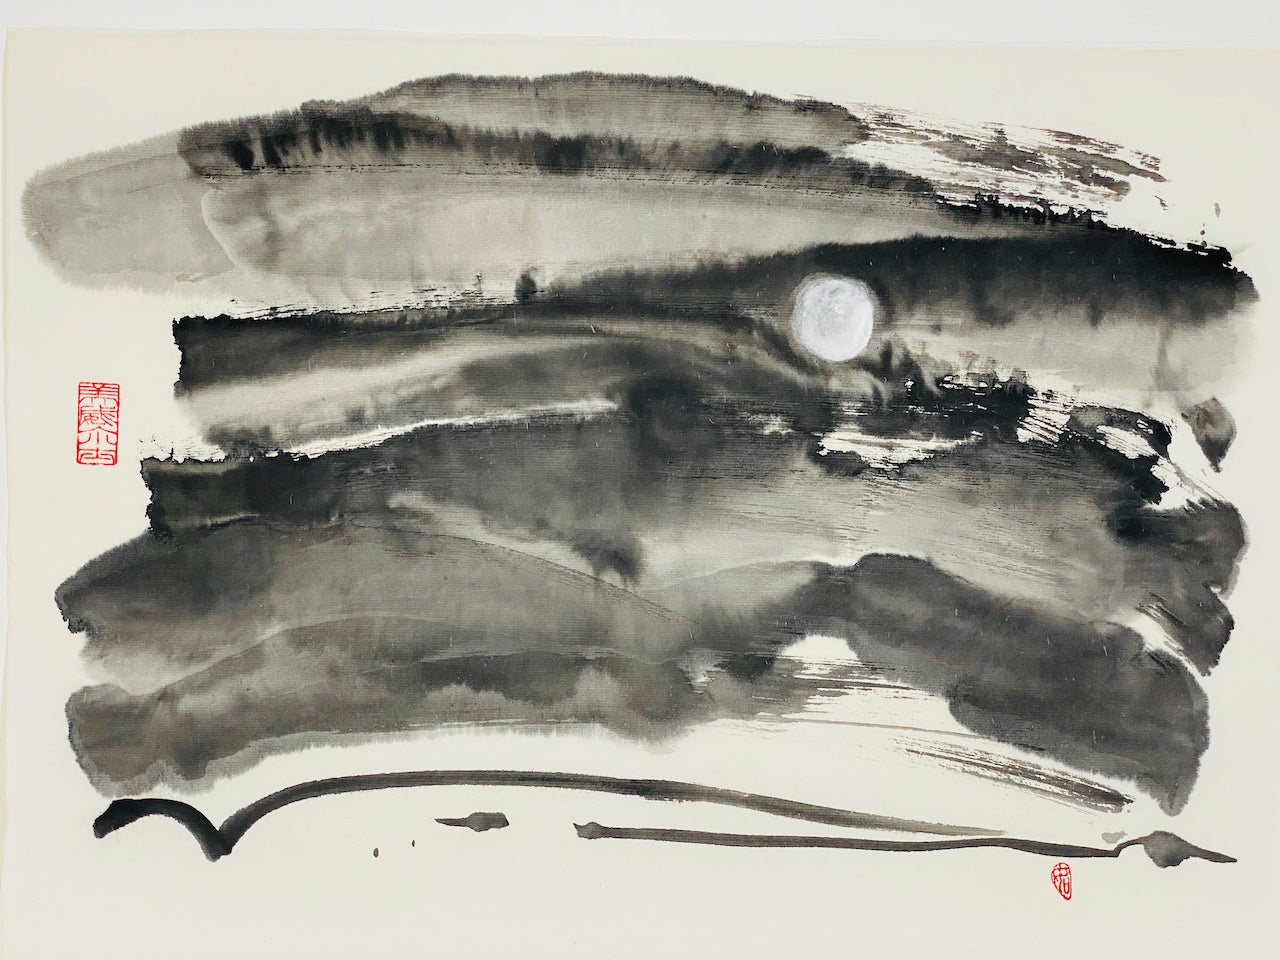 Abstract sumi e Print “A Pallid Ember” by Marilyn Wells